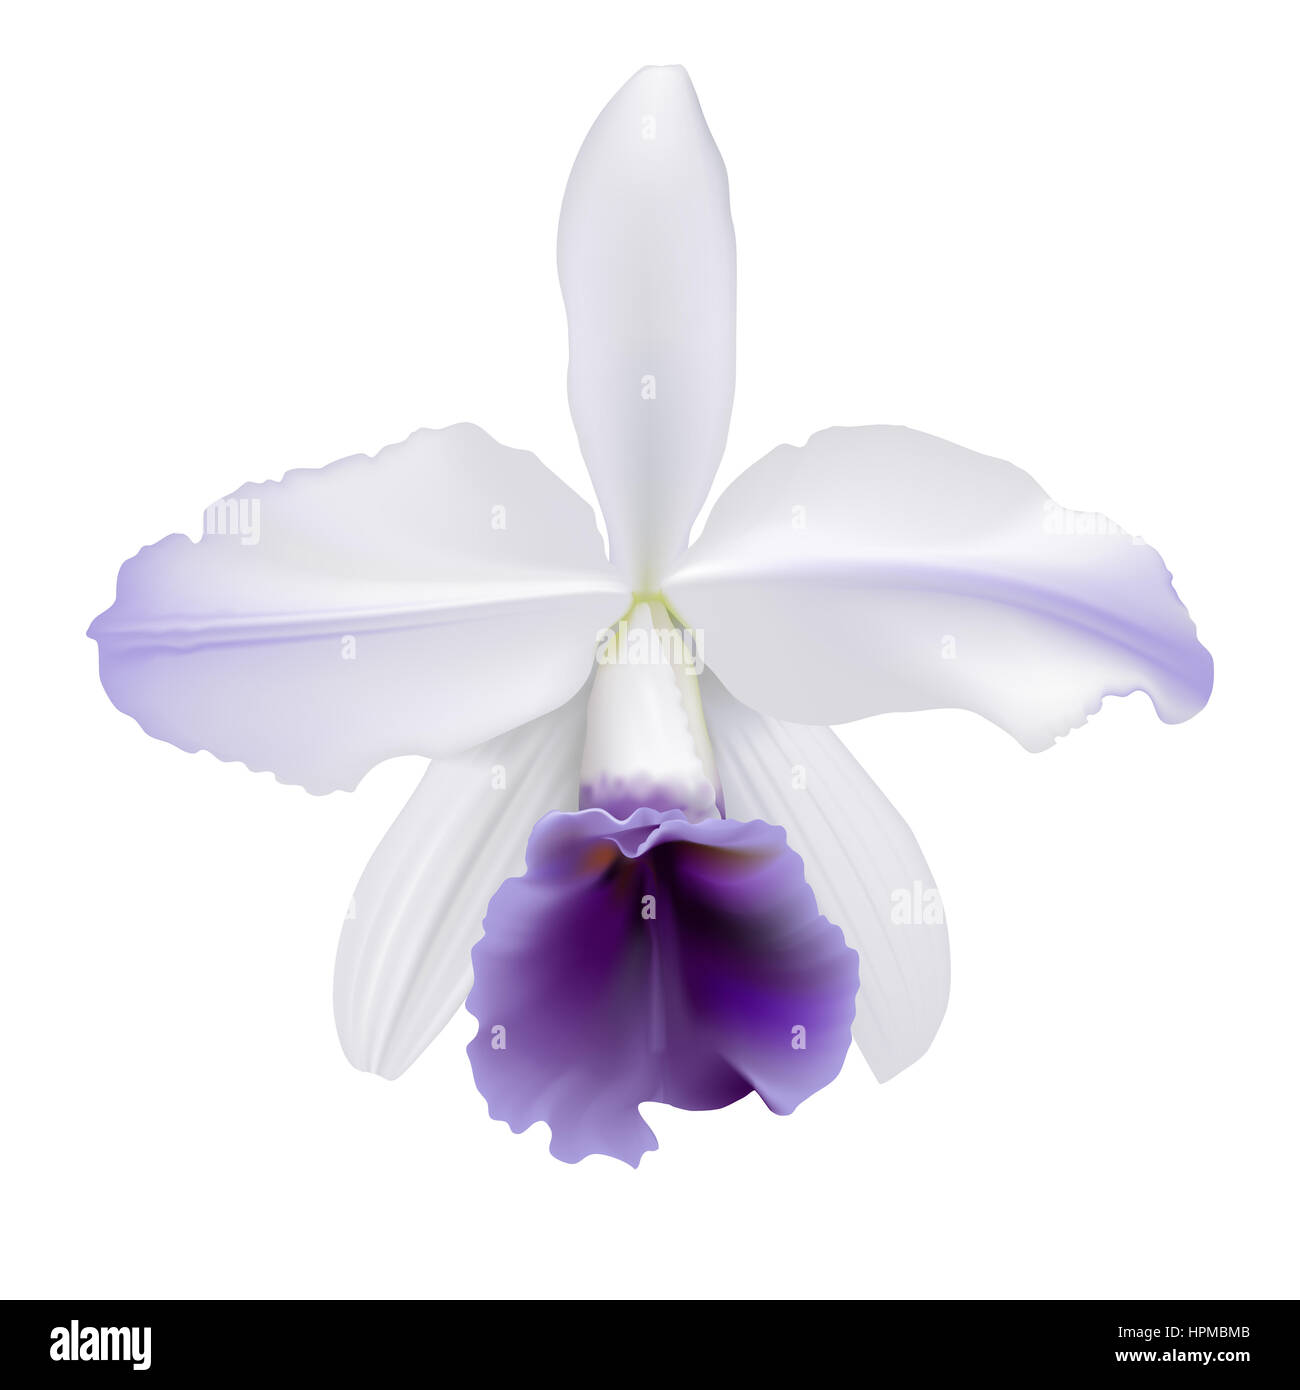 Orchid.  Digital illustration of a tropical orchid  Lc. Gaskell-pumila 'Azure Star', with white petals and purple lip, on white background. Stock Photo